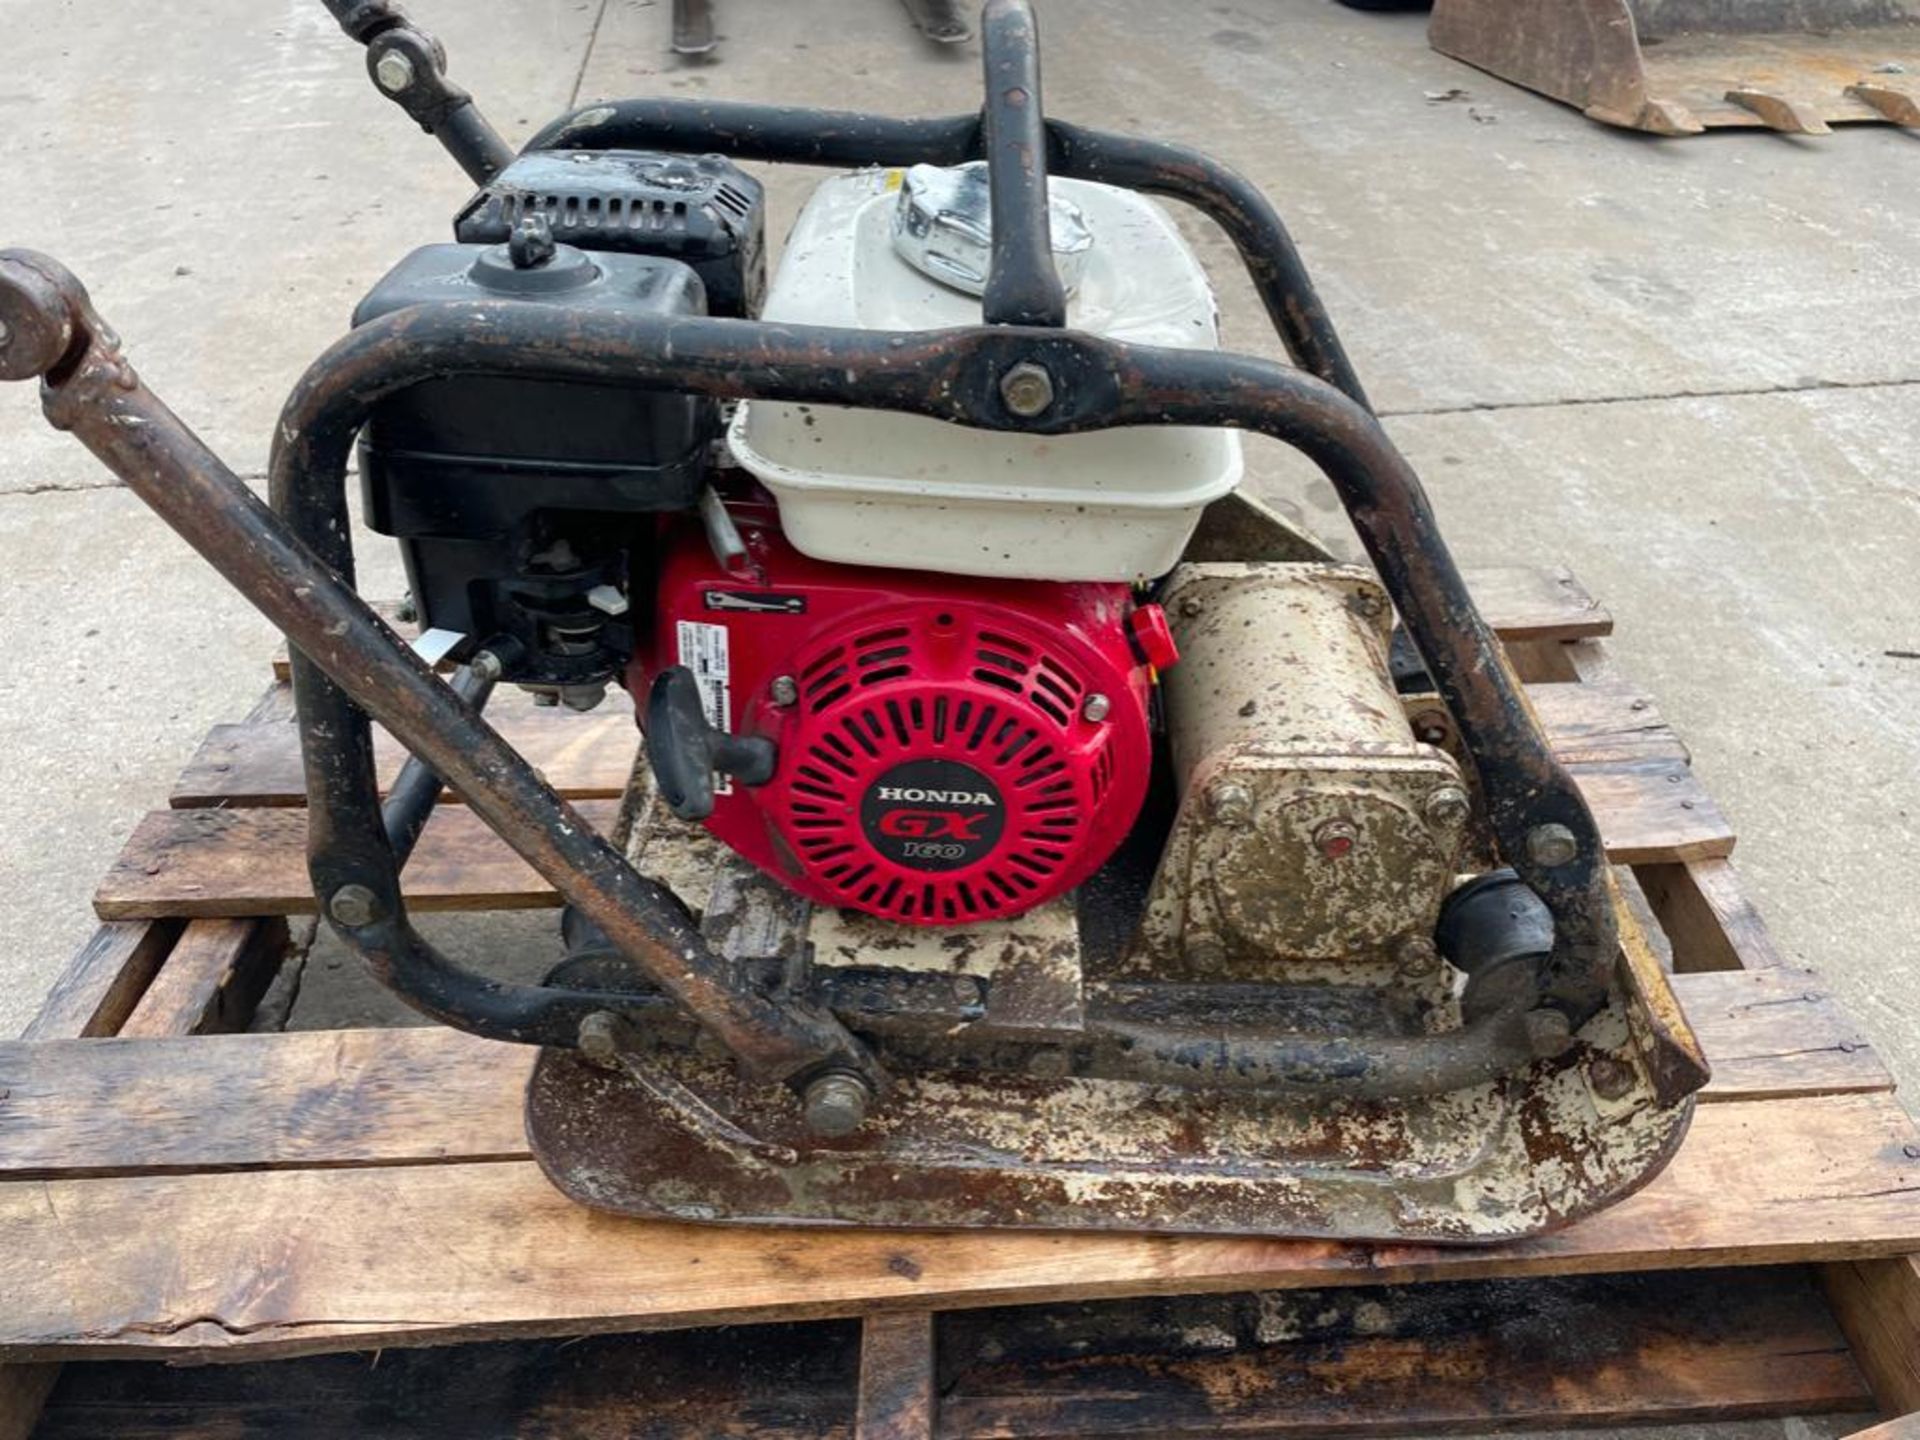 Ingersoll-Rand Plate Compactor, Honda GX160 Engine. Located in Hazelwood, MO - Image 5 of 7